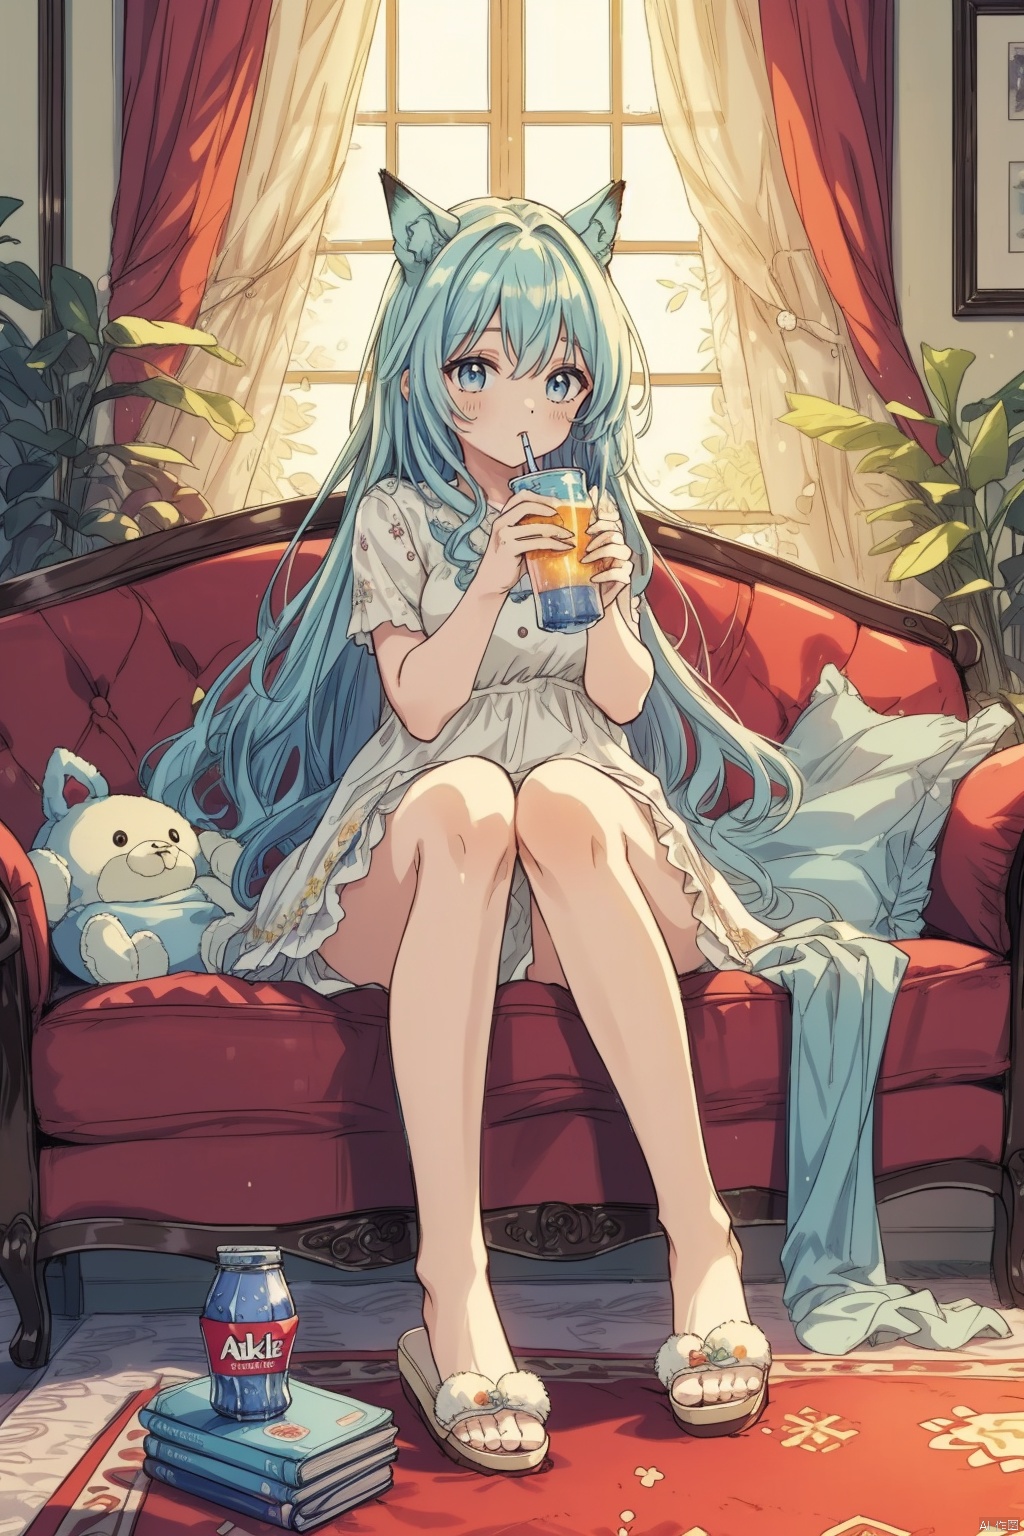  masterpiece, panorama,1 girl, cute, solo focus, long curly hair, light blue hair, happy face, delicate dress, hair spin, ((sitting on sofa)), slippers, a delicate sitting room, deep of field, a photo frame on the wall, velvet curtains, sofa in modern minimalist style, Stuffed toys on the floor,drinking soft drink,((carpet)) on the floor, game consoles scattered on the floor, summer holiday, drinking soft drinks, beautiful flowers around her, backlight, mLD, cozy anime, (\ji jian\), akebi komichi, green eyes, ceobe_(arknights)